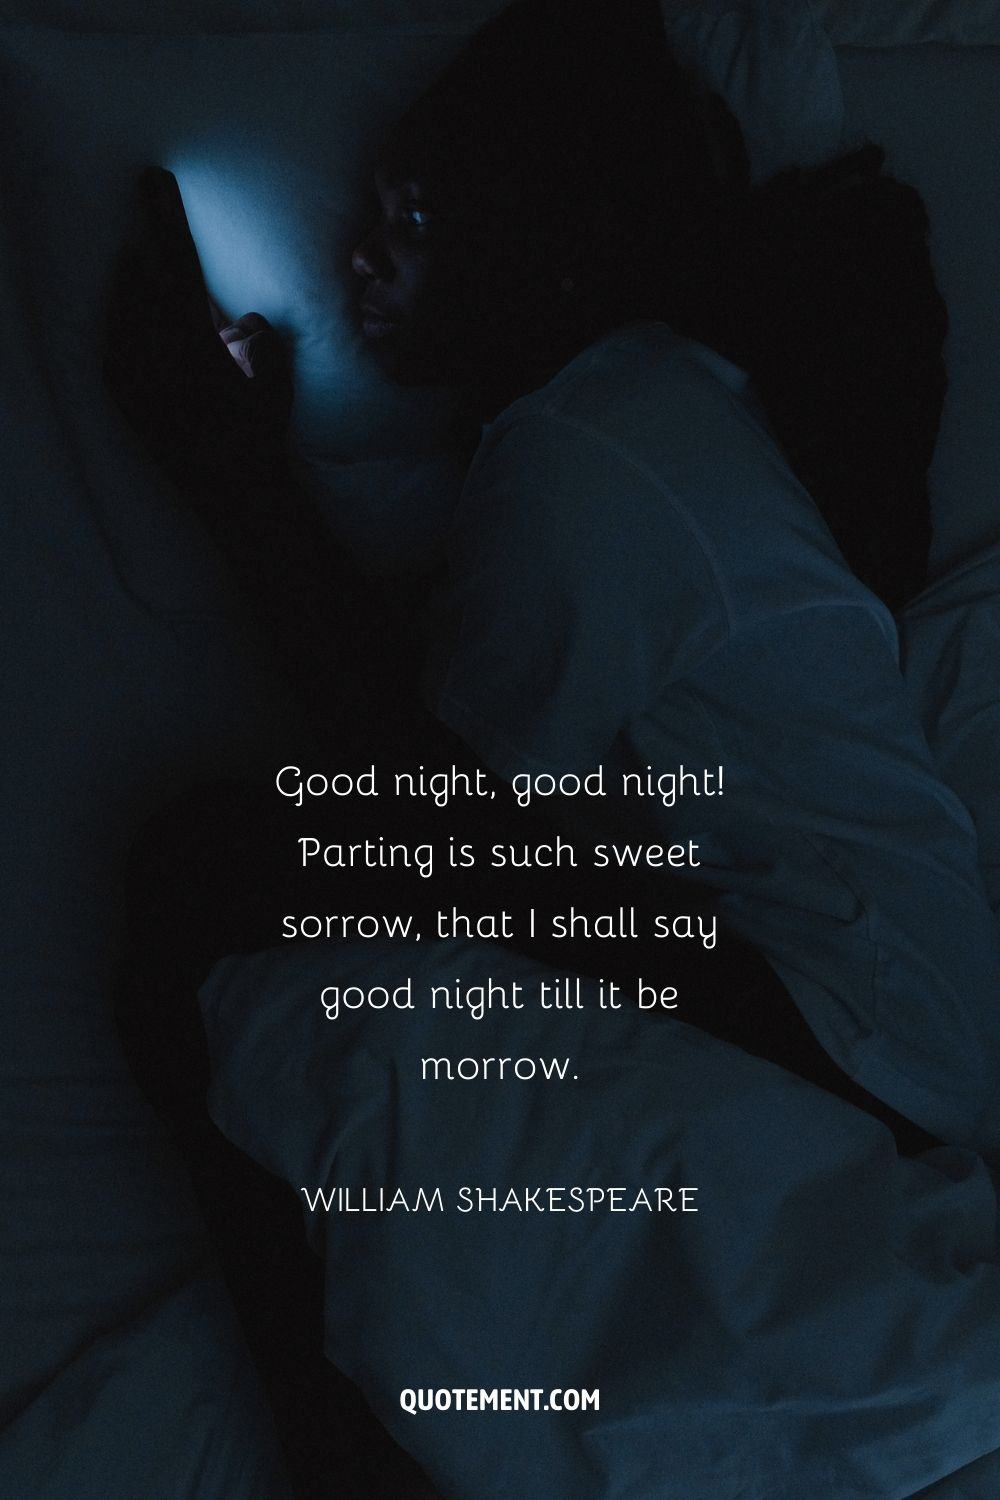 Good night, good night! Parting is such sweet sorrow, that I shall say good night till it be morrow.